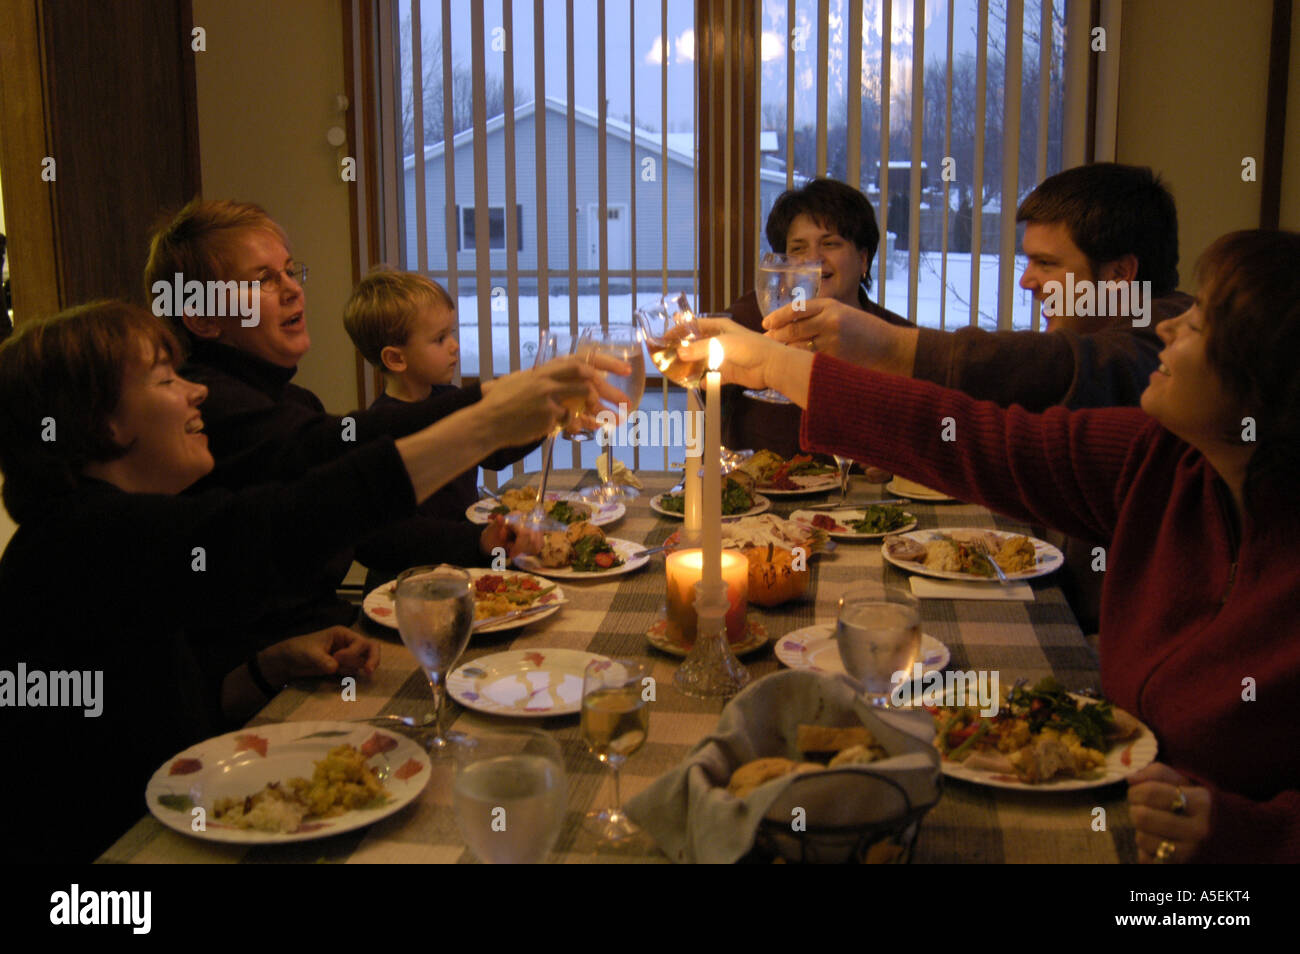 Caucasian family raises (wine) glasses in a toast of cheer during dining on thanksgiving Stock Photo